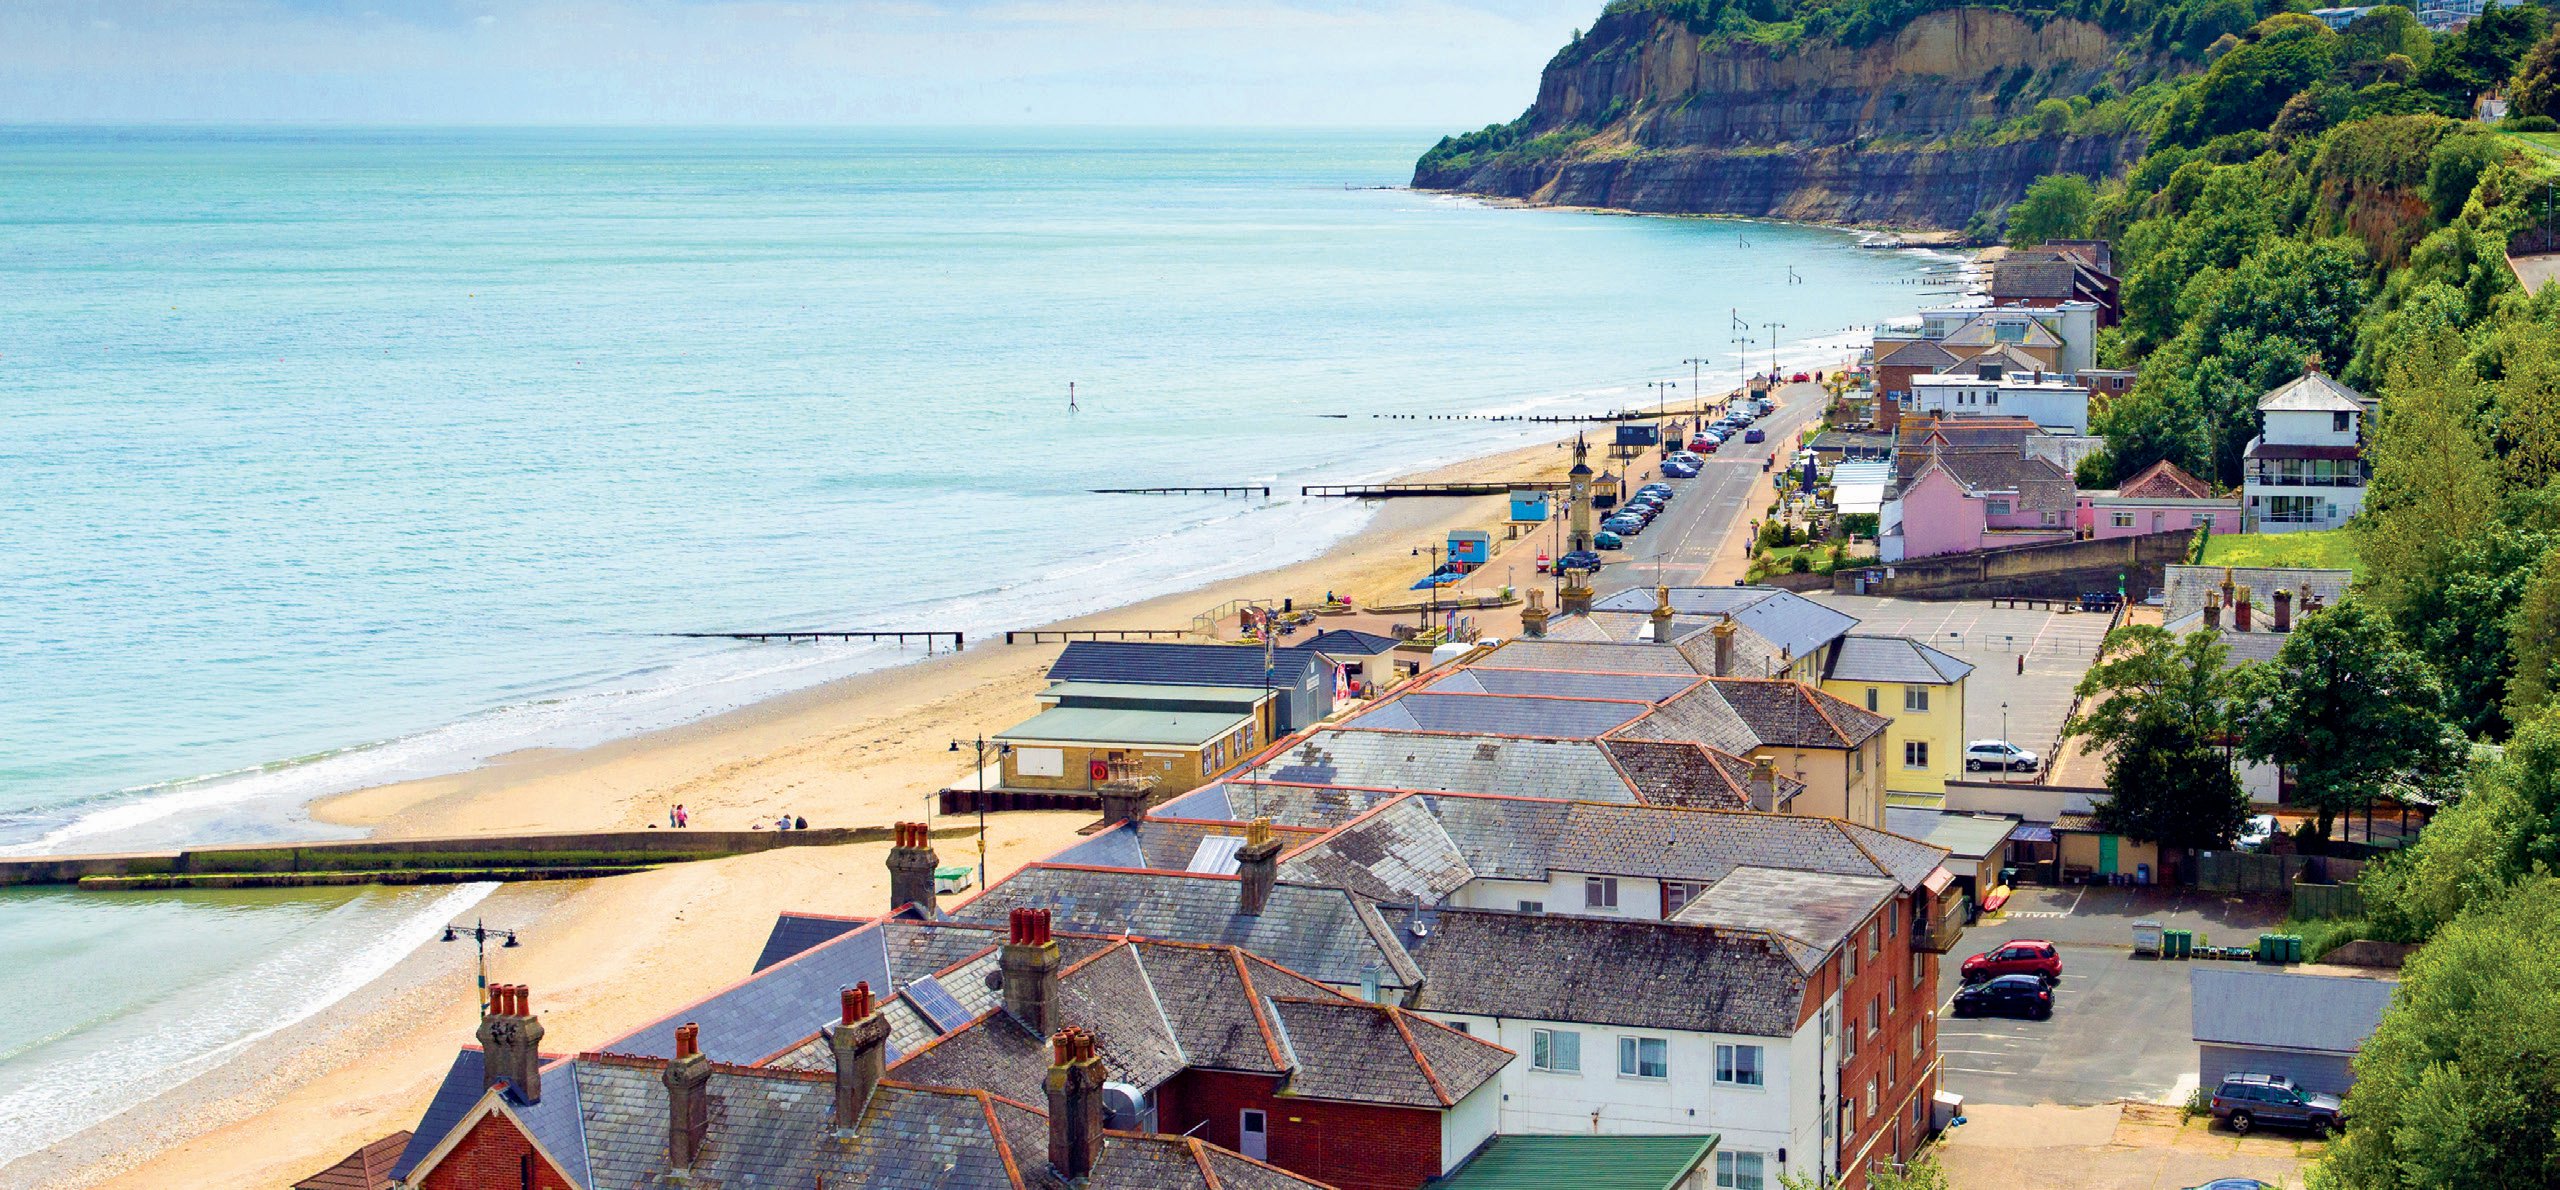 Coach holidays to Shanklin